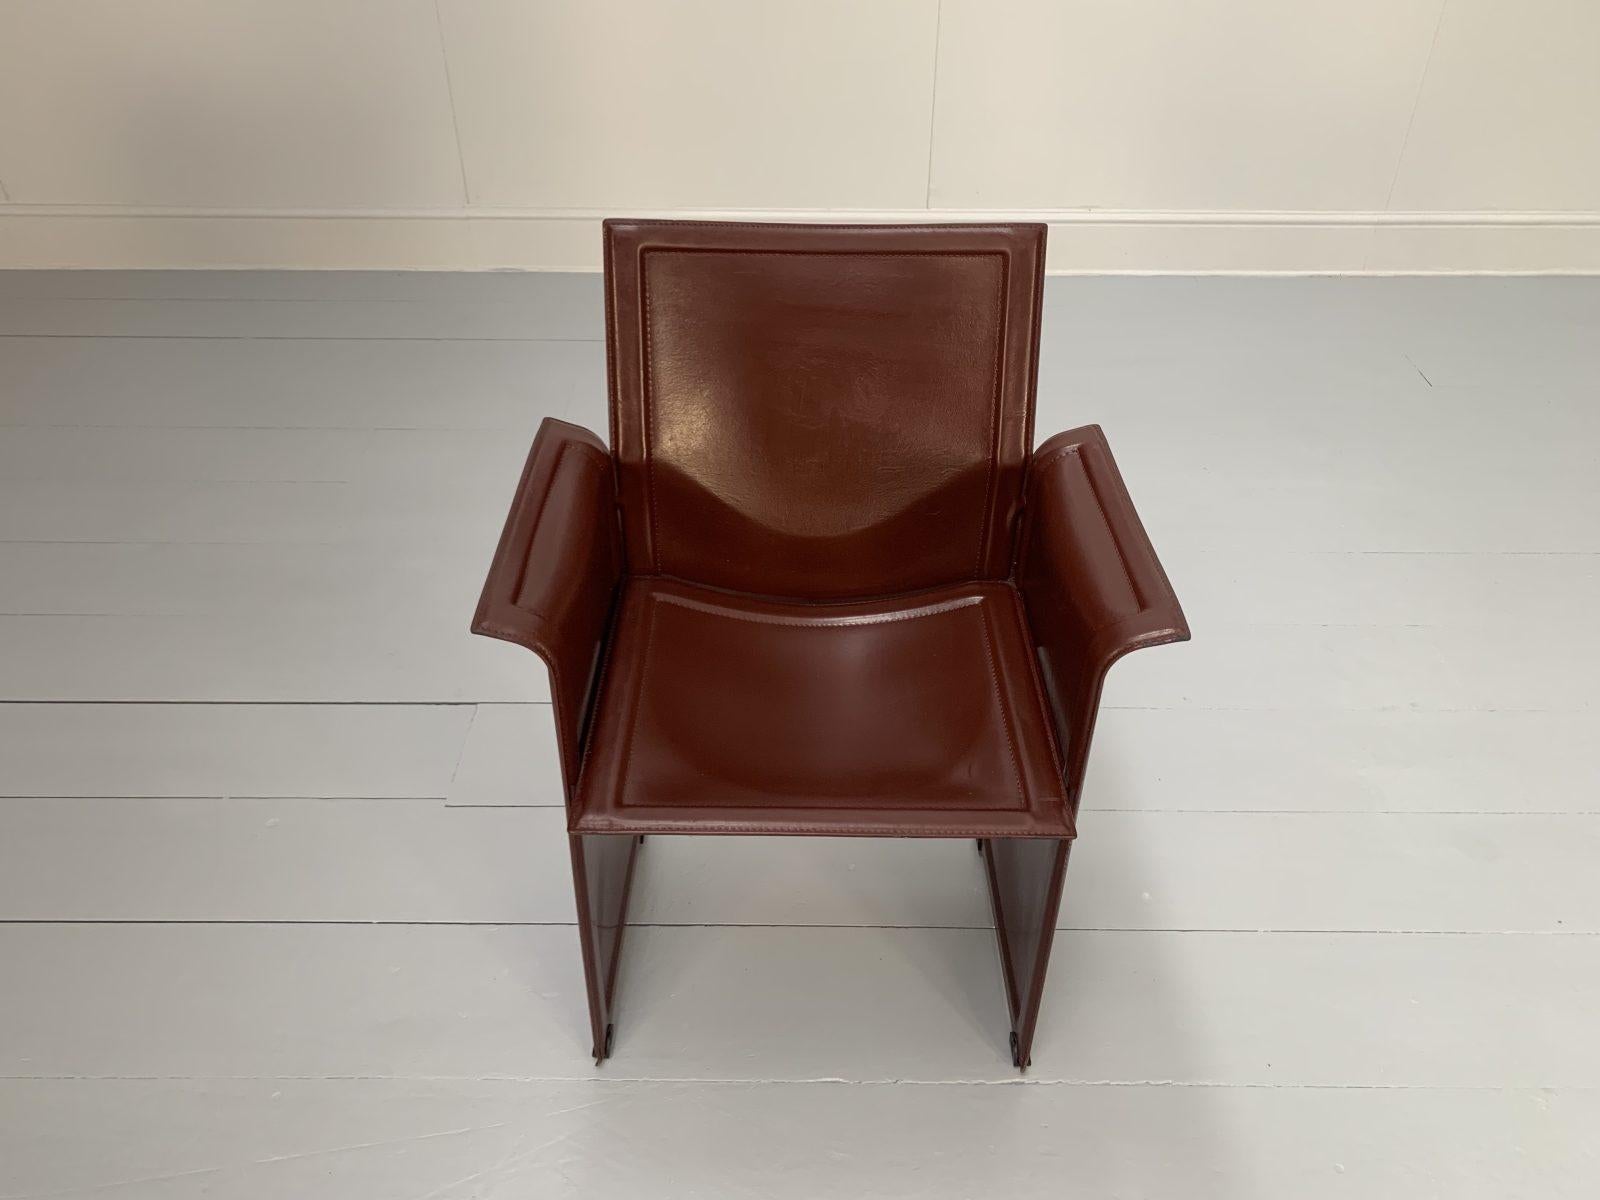 8 Matteo Grassi “Korium” Dining Chairs, in Brown Coach Leather For Sale 10